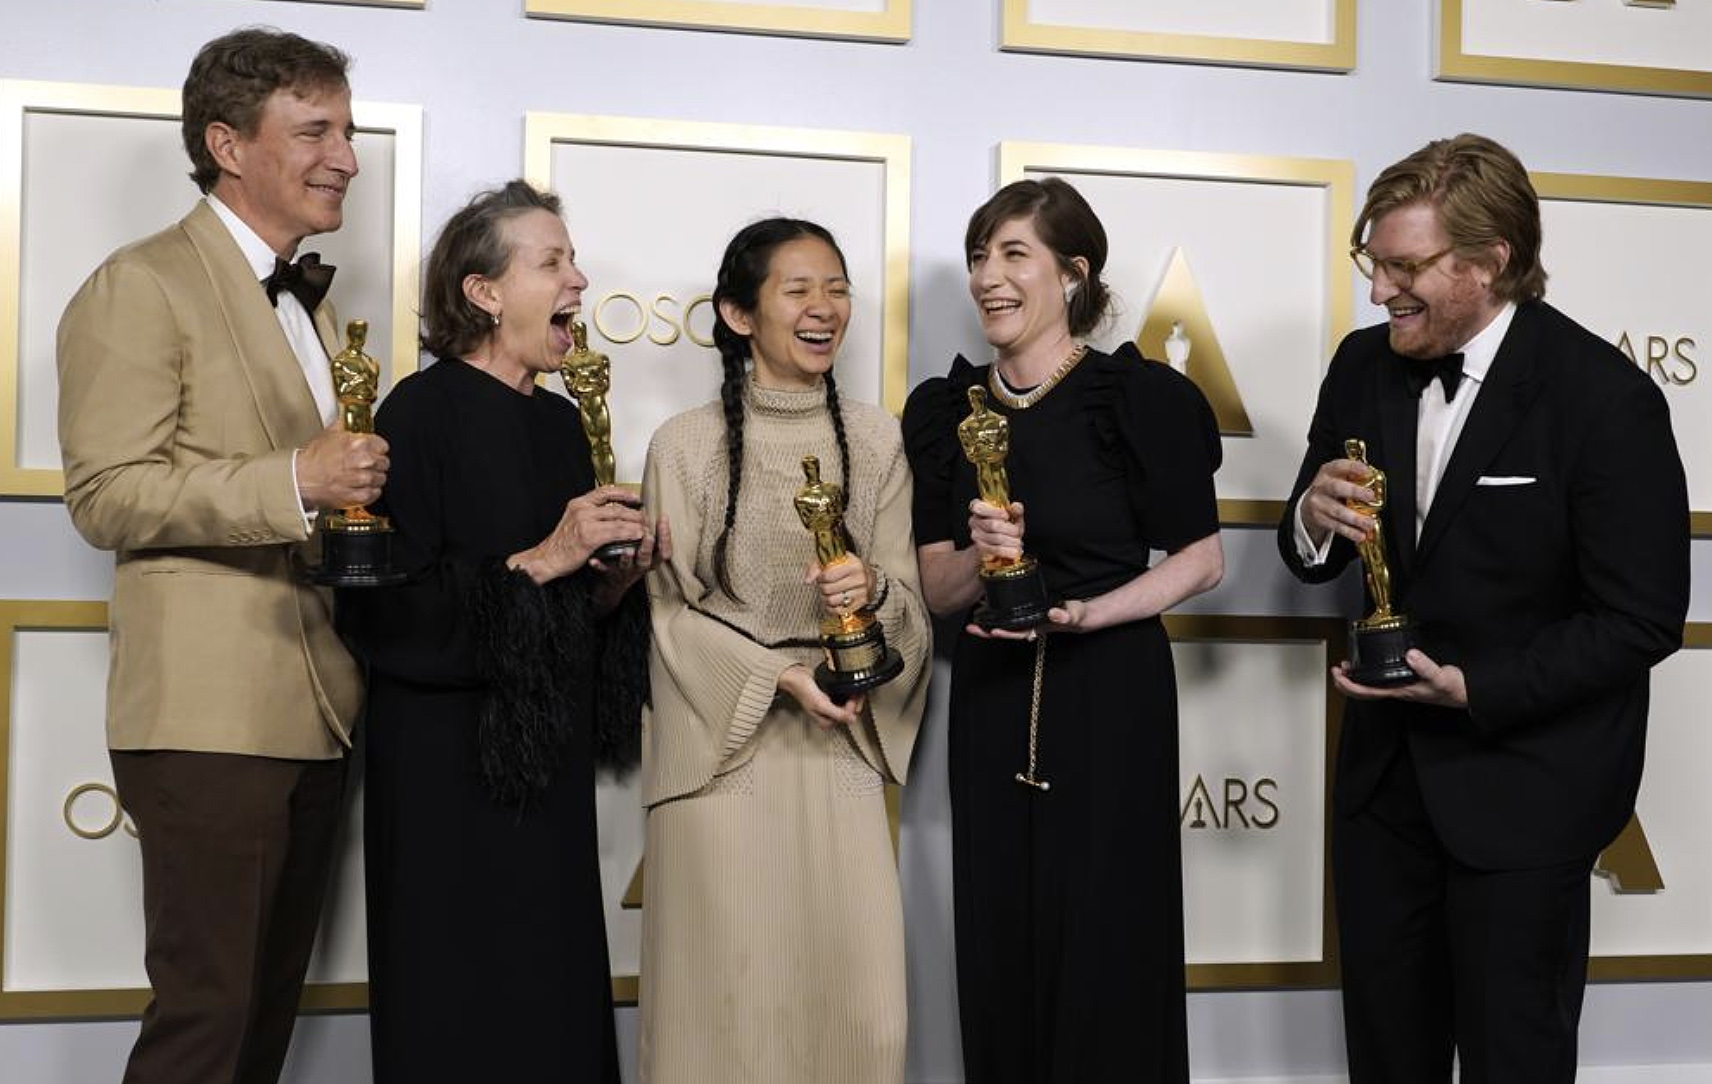 Producers Peter Spears, from left, Frances McDormand, Chloe Zhao, Mollye Asher and Dan Janvey, winners of the award for best picture for "Nomadland," pose in the press room at the Oscars on Sunday, April 25, 2021, at Union Station in Los Angeles. (AP Photo/Chris Pizzello, Pool)